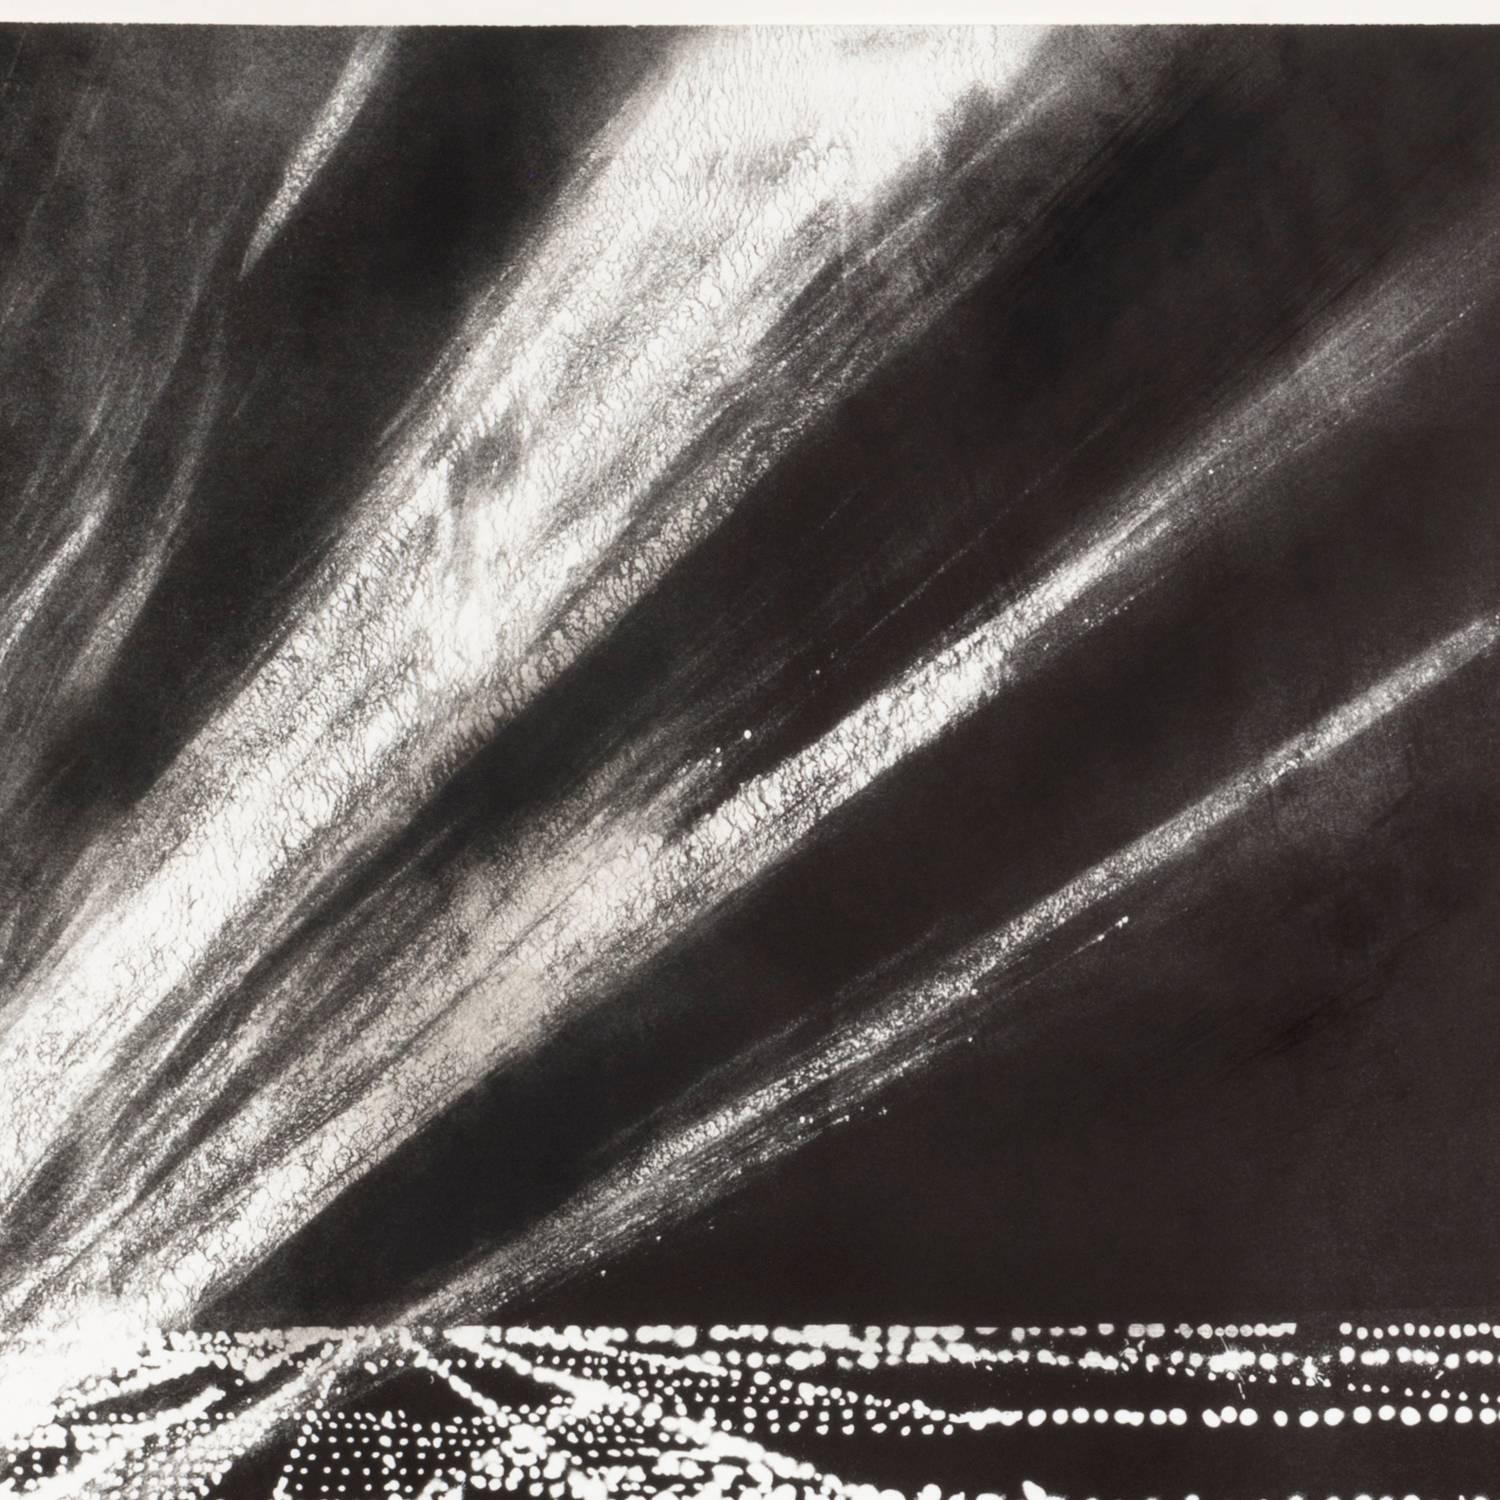 LAX XXIX, 1989
monoprint
57-1/8 x 49" - framed

signed in pencil lower right 

Peter Alexander (born 27 February 1939) is an important and influential American artist who pioneered the Light and Space artistic movement in southern